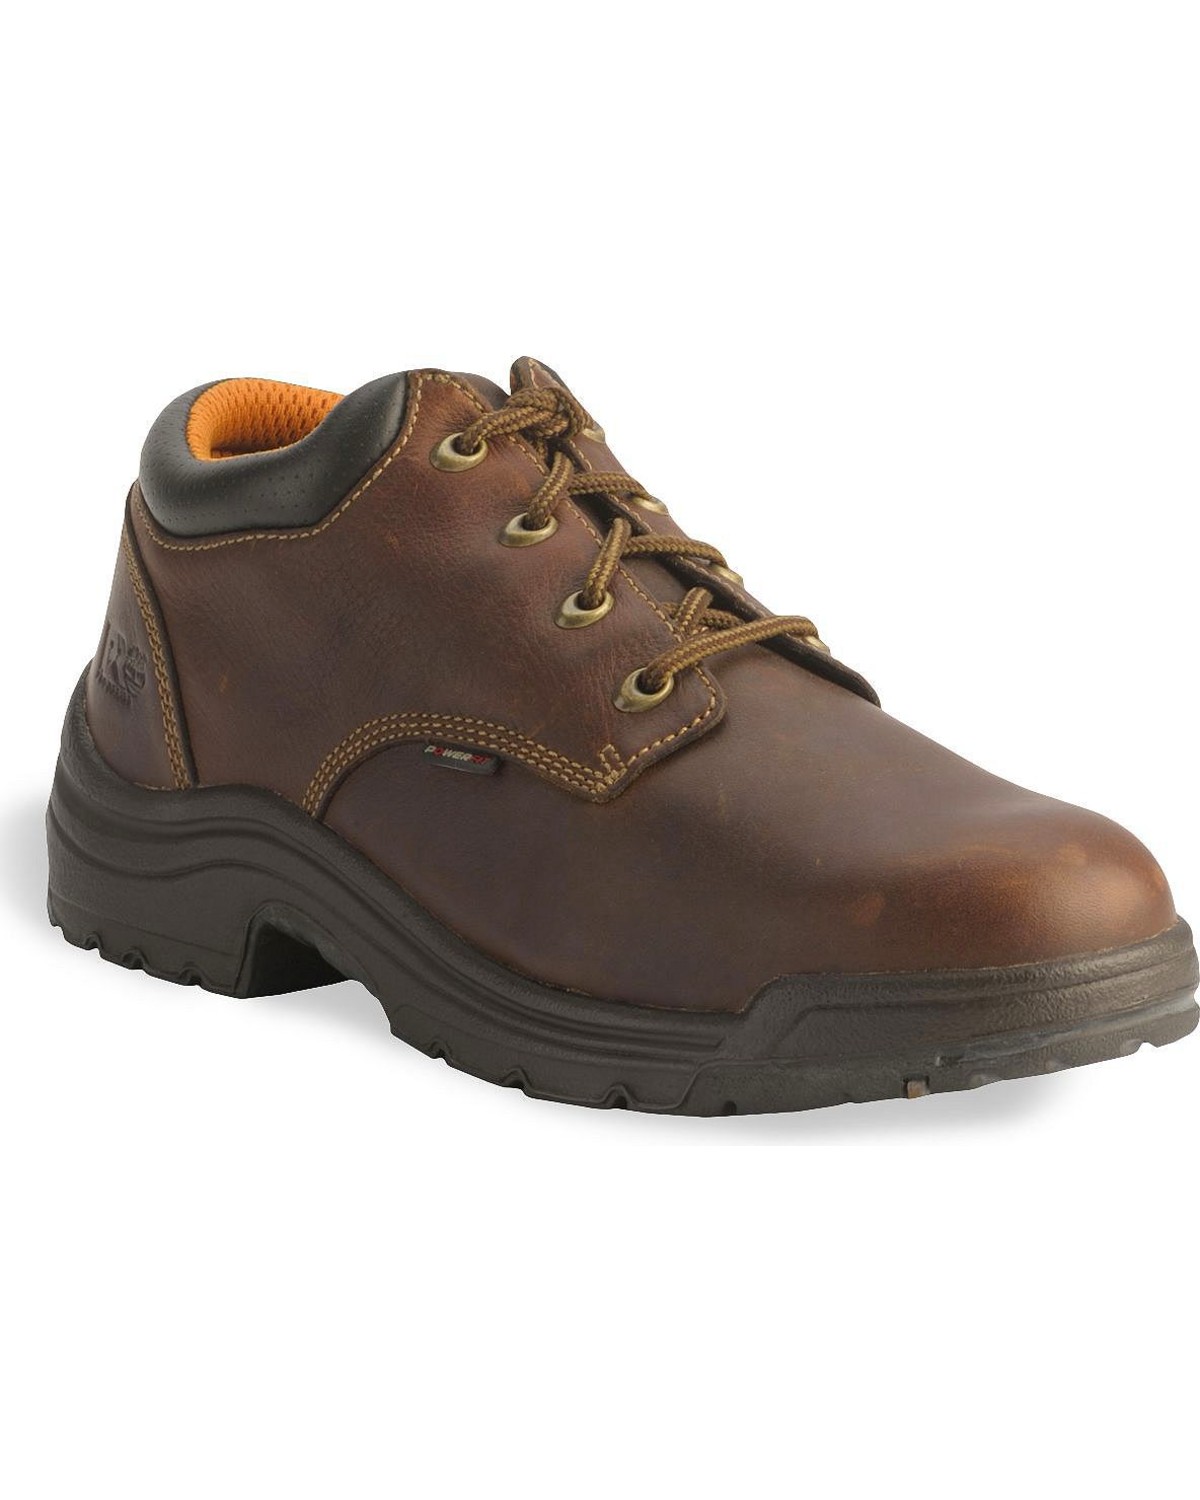 Timberland Pro Haystack Titan Oxford Shoes - Soft Toe